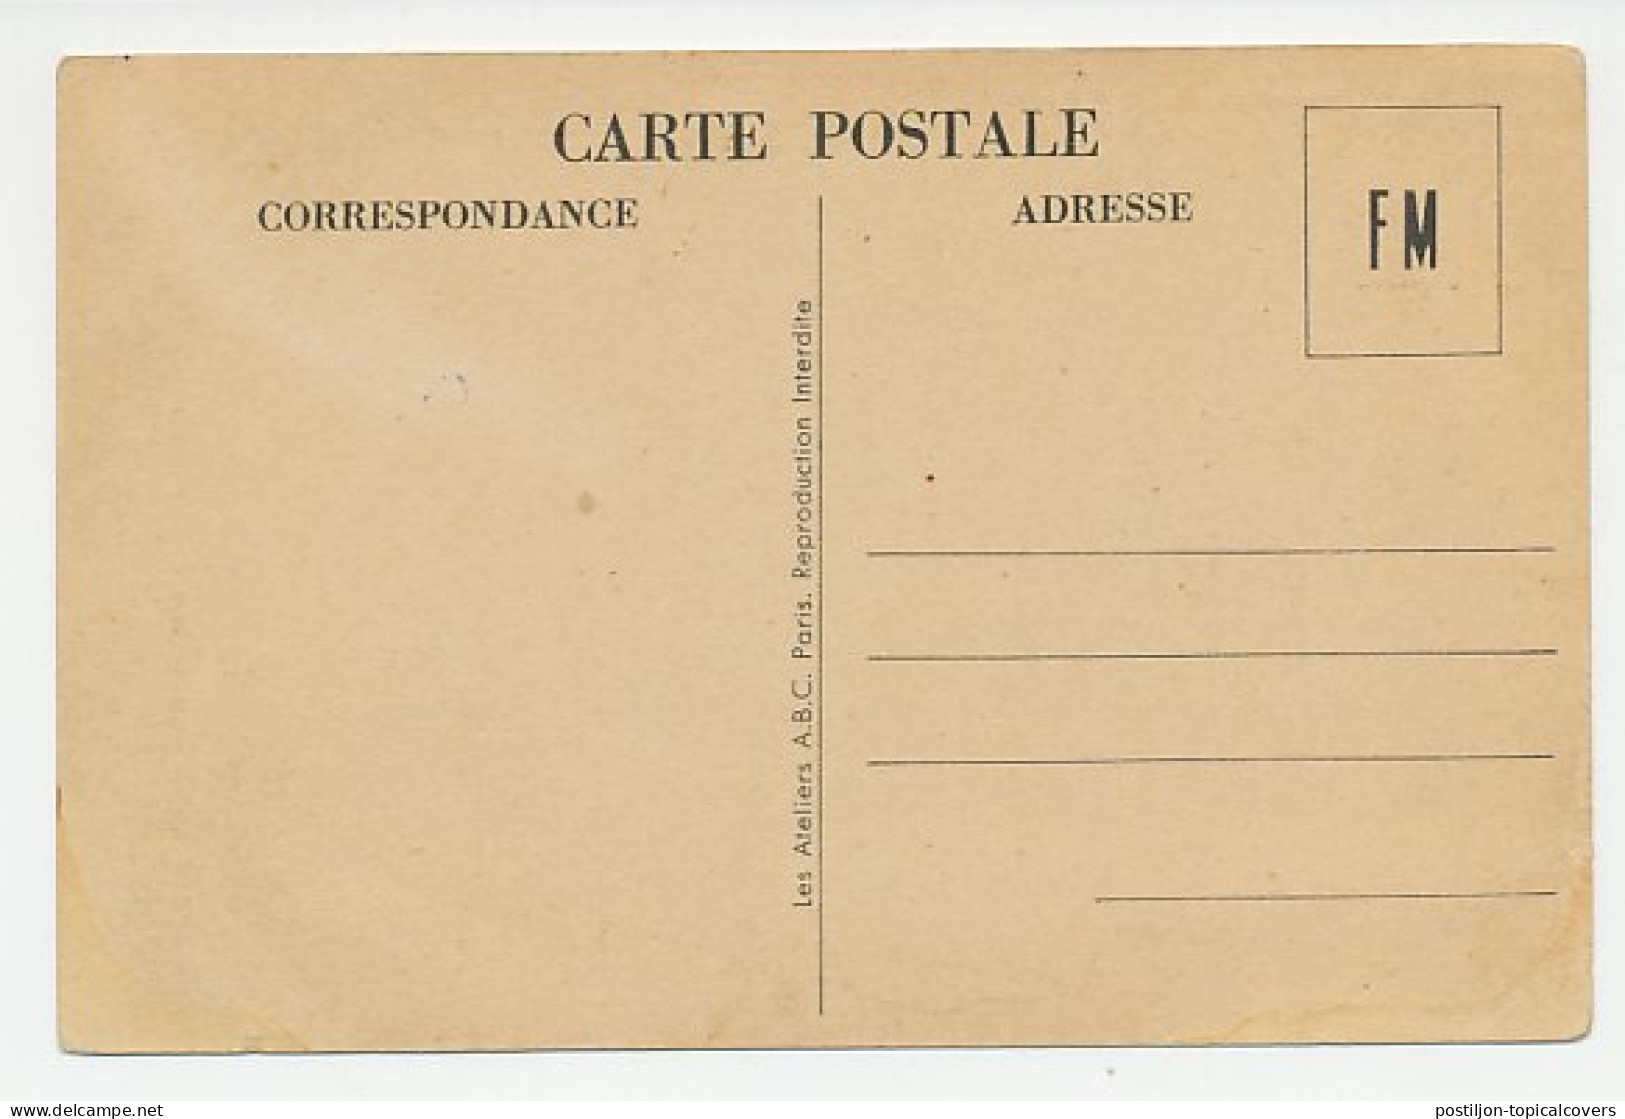 Military Service Card France Pipe Smoking - WWII - Tabac